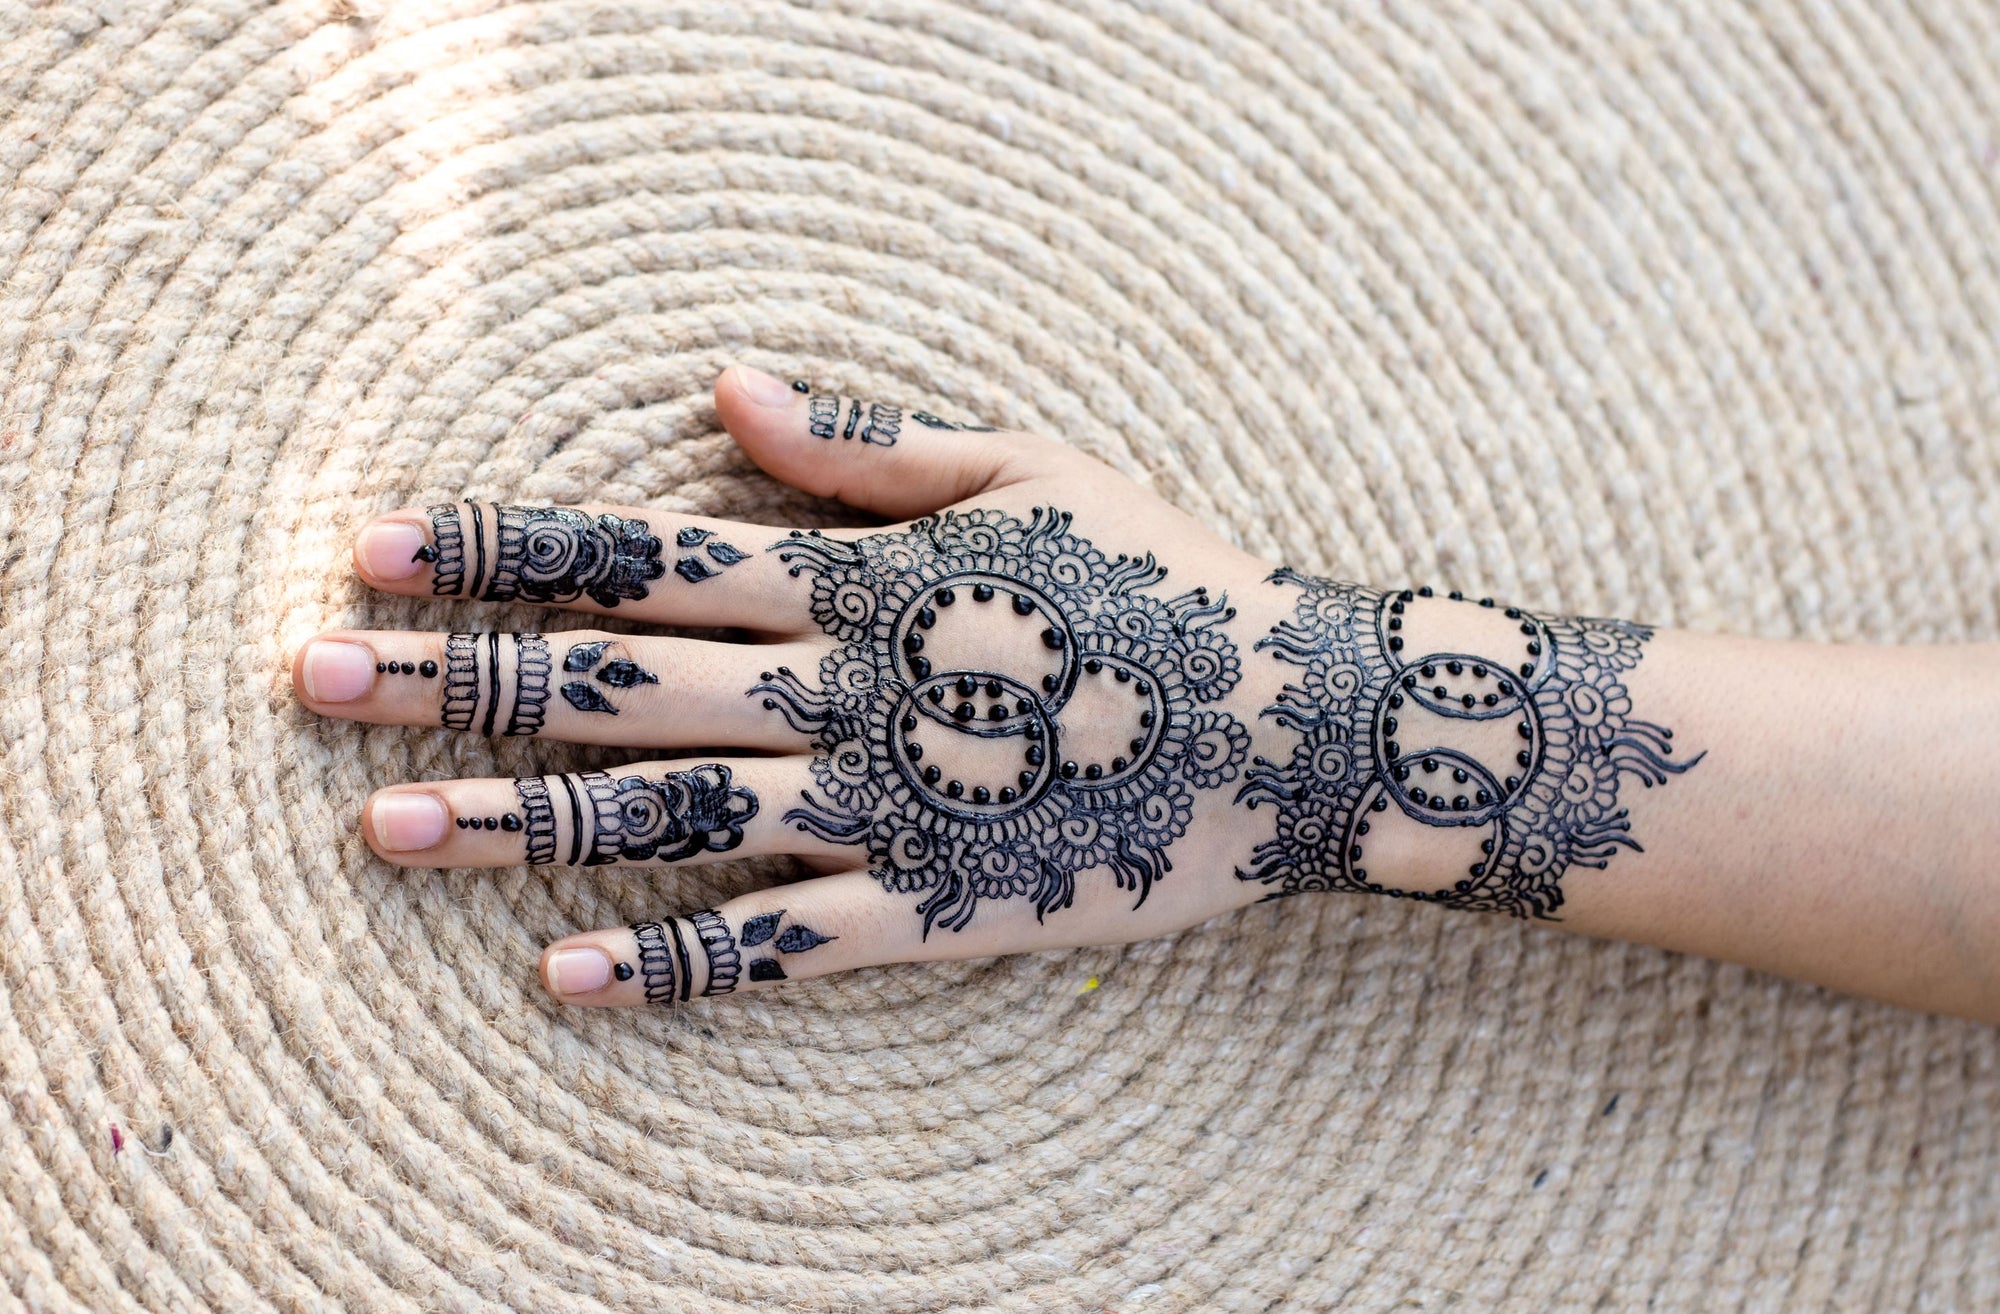 The Significance of Henna in Islam